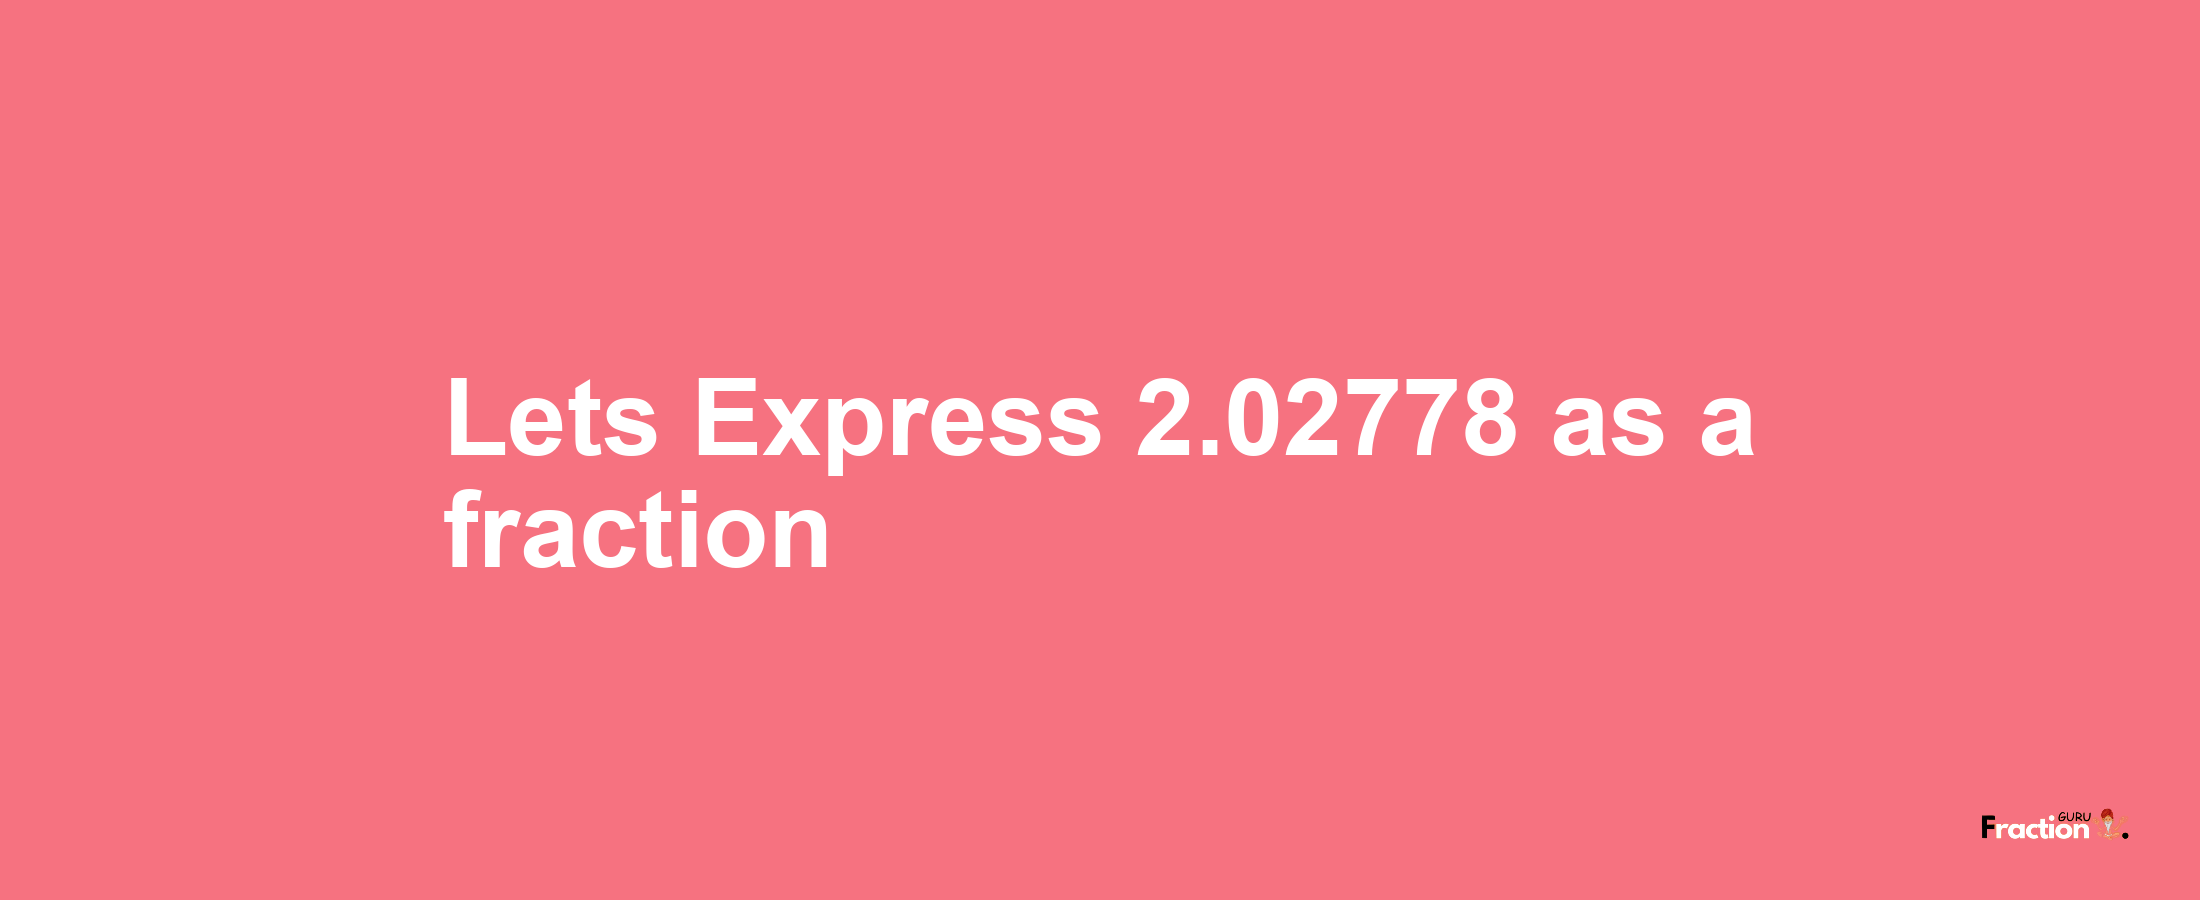 Lets Express 2.02778 as afraction